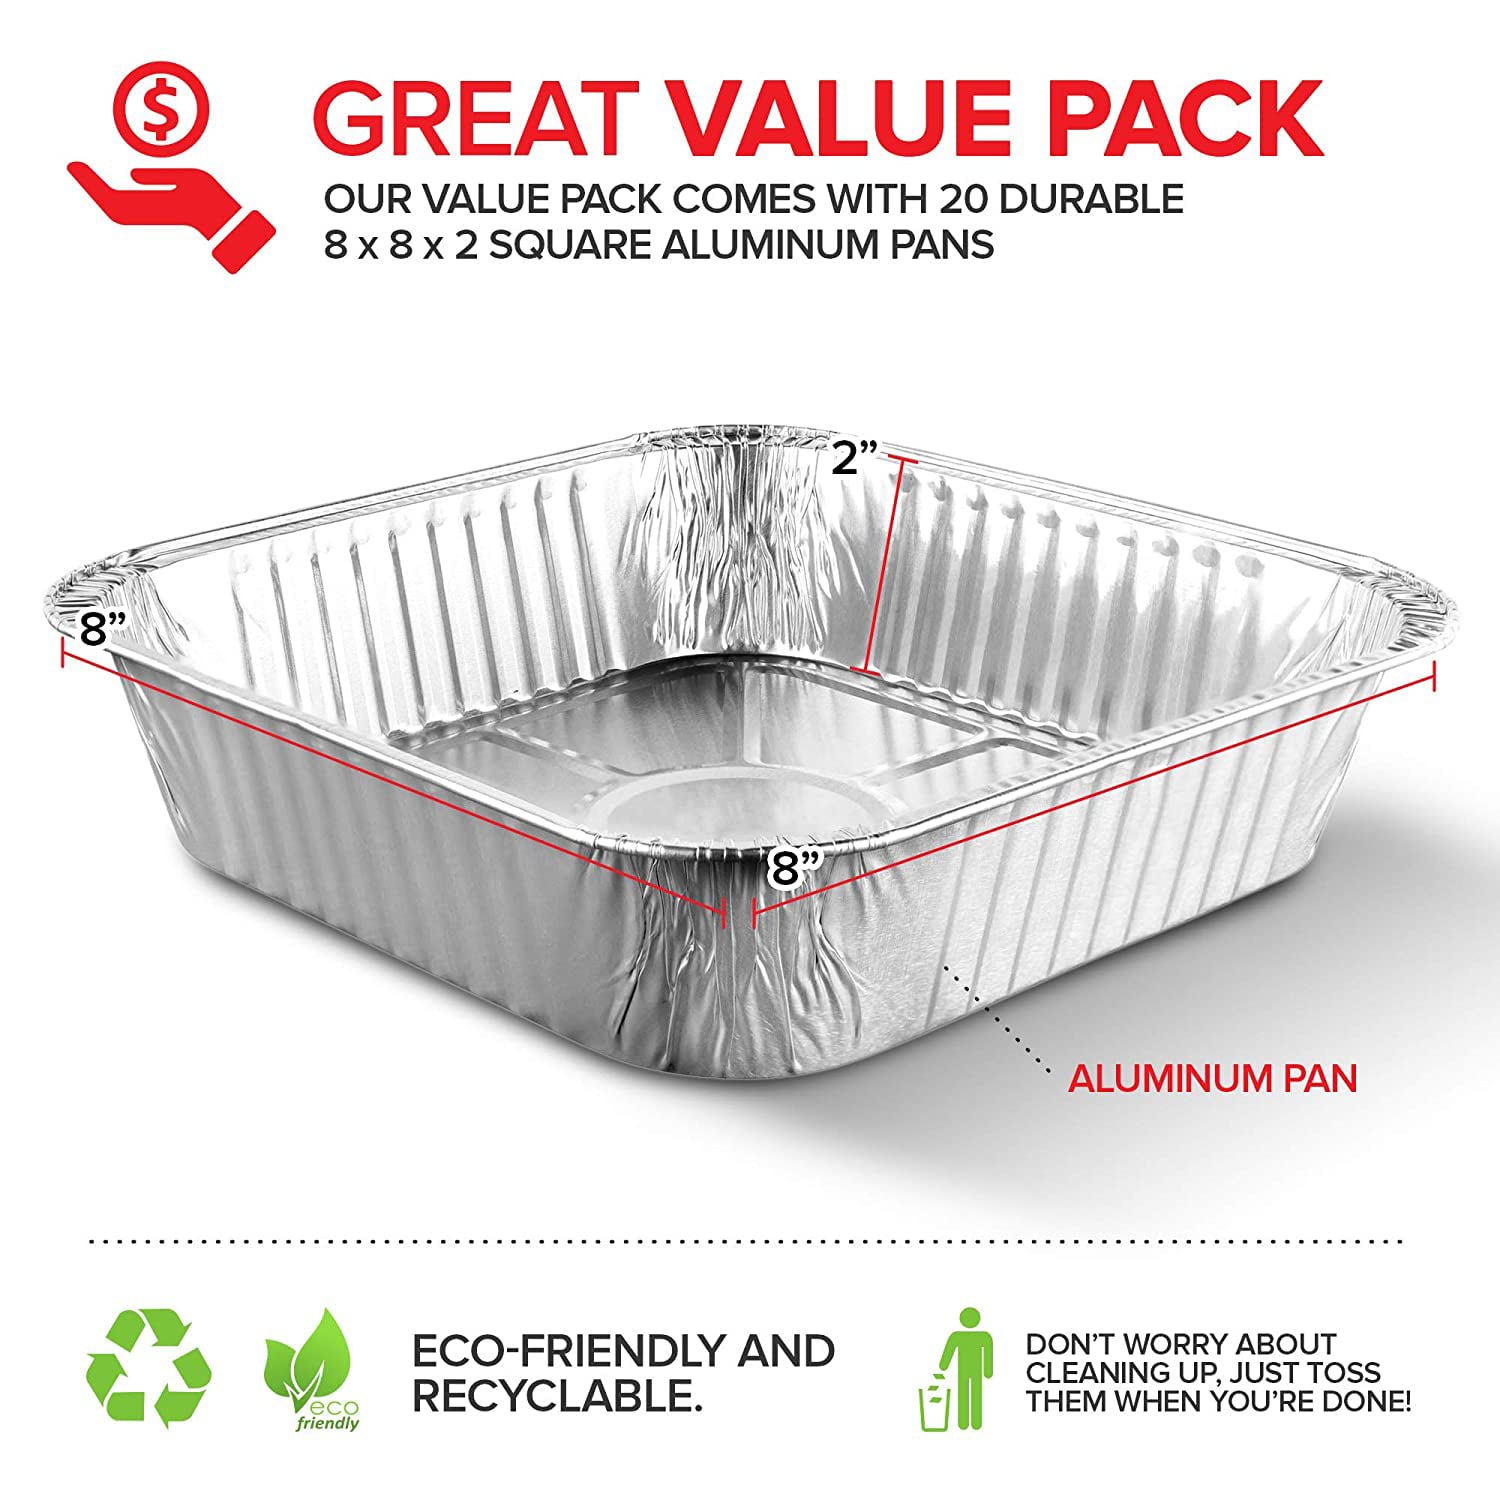 Dropship 8x8 Disposable Aluminum Foil Meal Prep Cookware Square Pans,  Oven, Toaster, Grill, Cooking, Roasting, Broiling, Baking, Event, Take Out,  Restaurant to Sell Online at a Lower Price